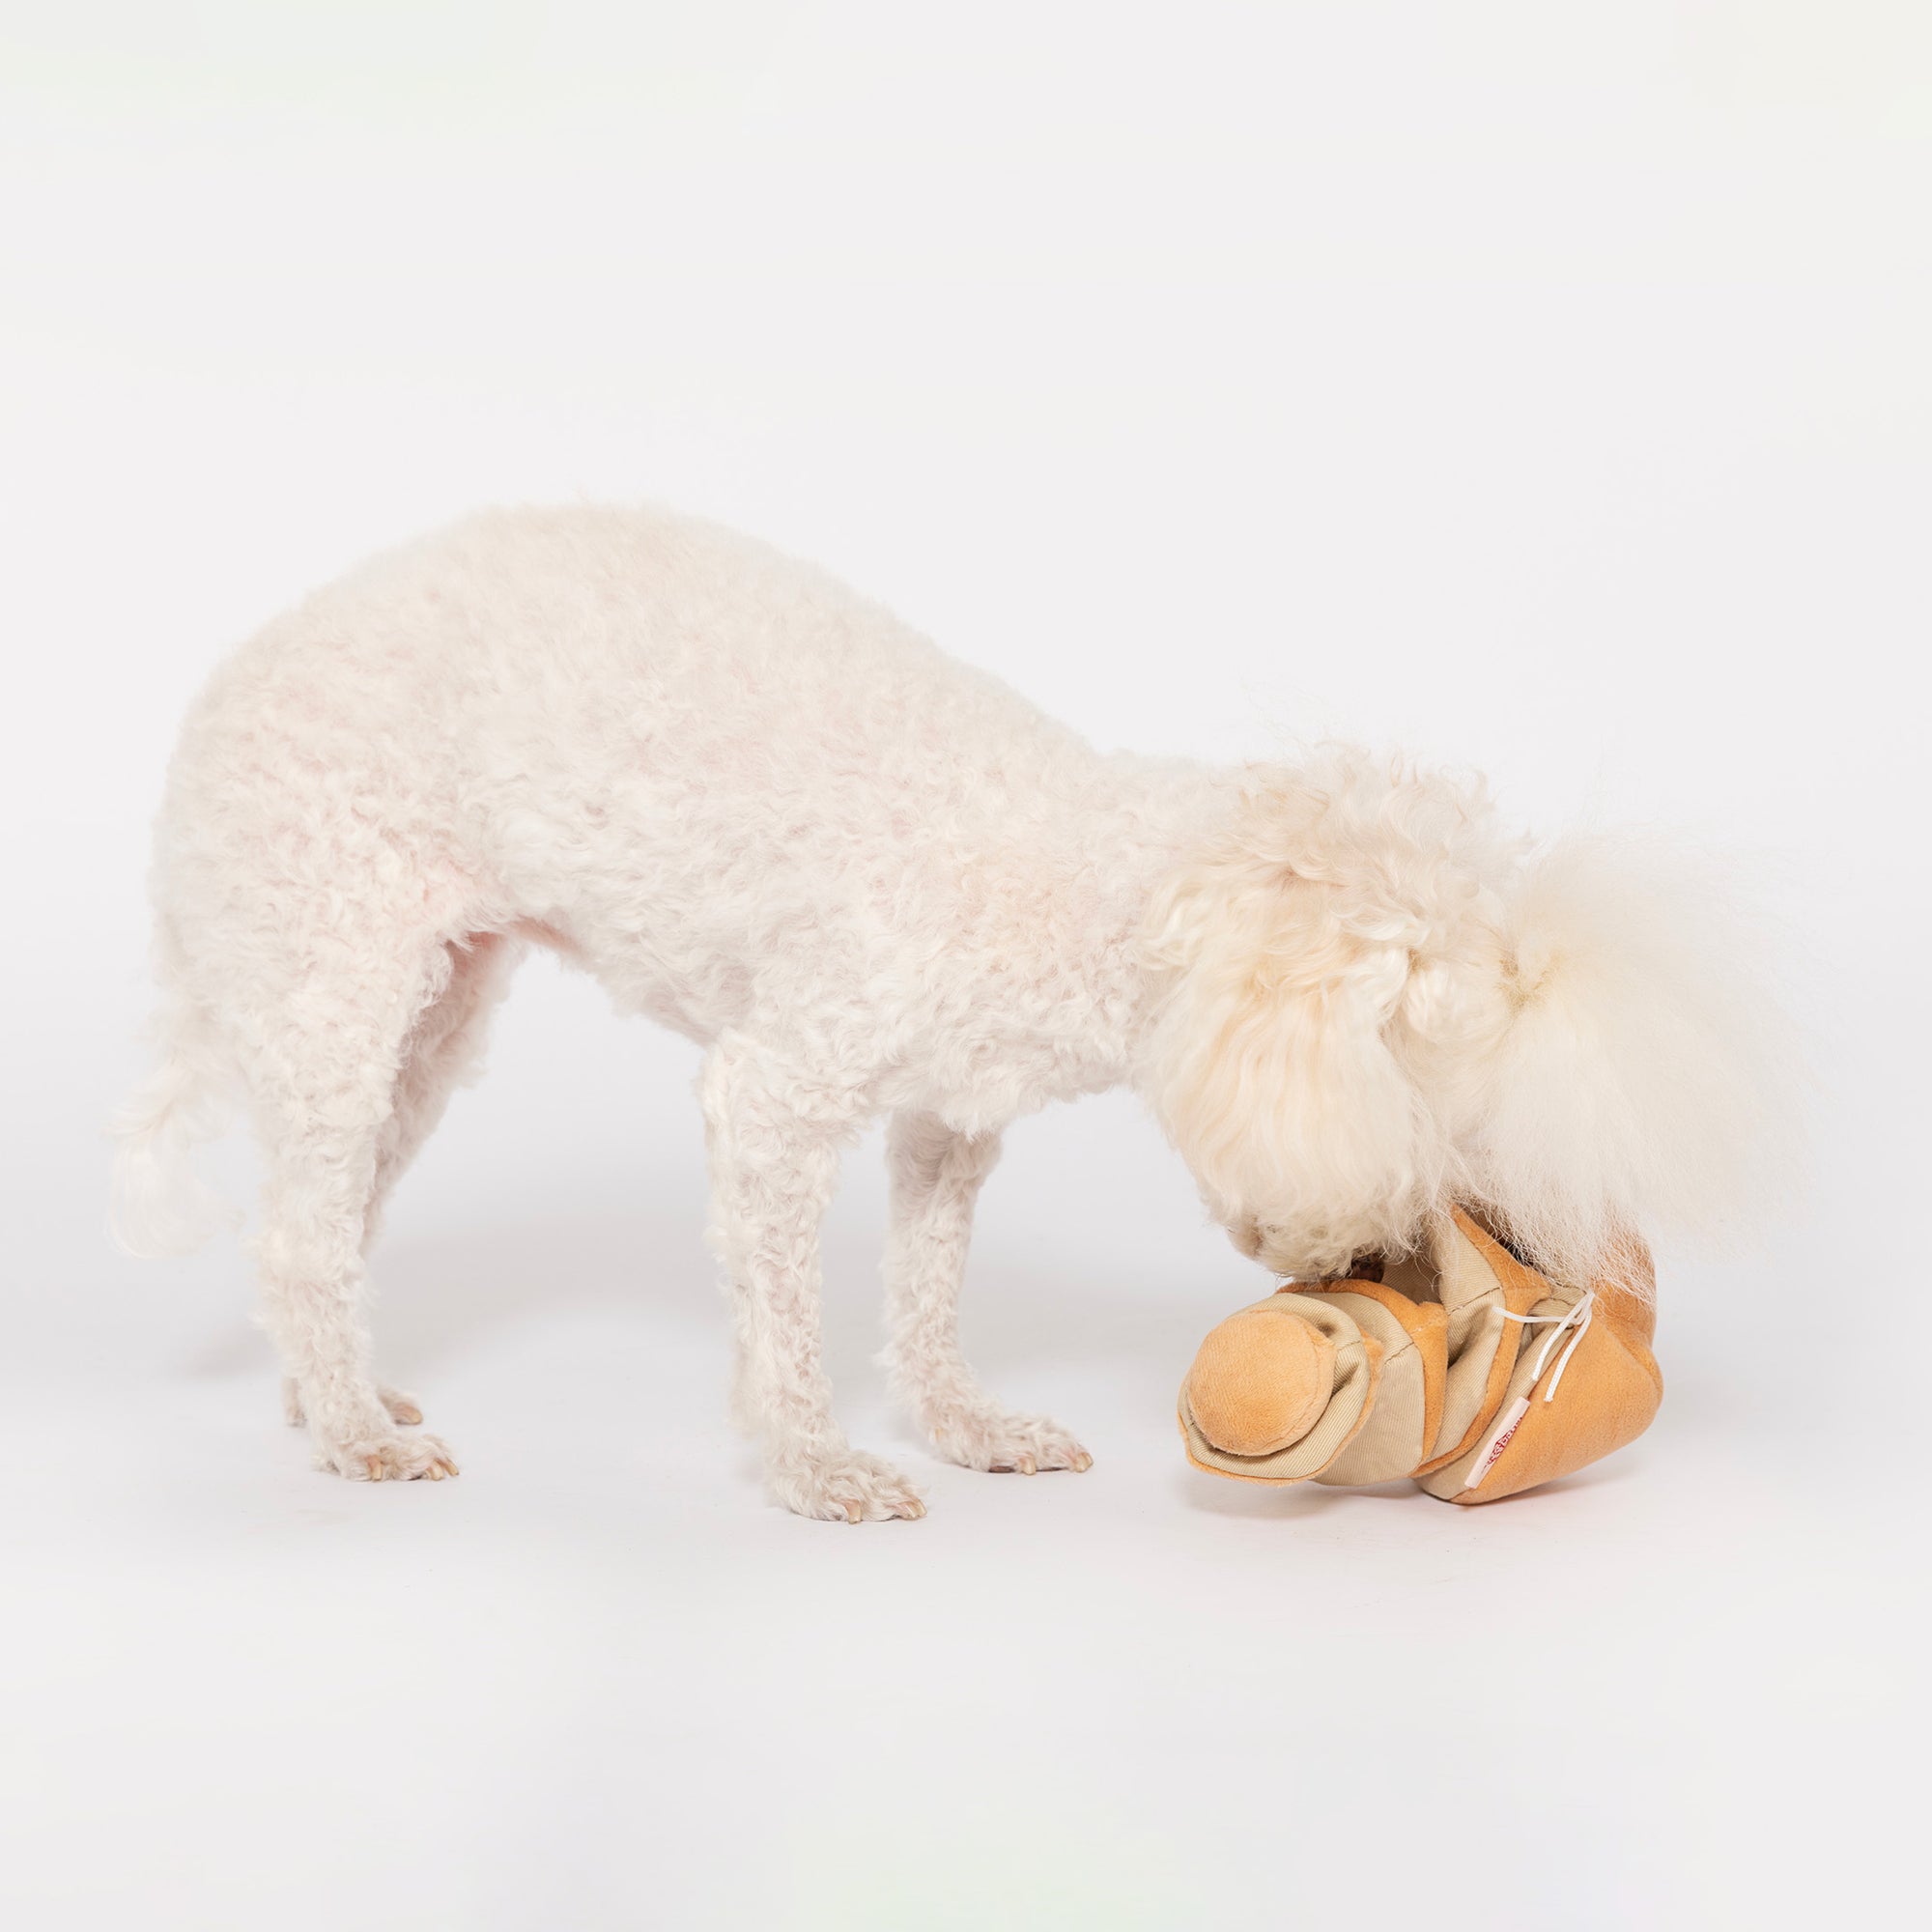 Engaged white dog with a fluffy coat exploring compartments of a yellow onion-shaped nosework toy, ideal for mental stimulation and play.